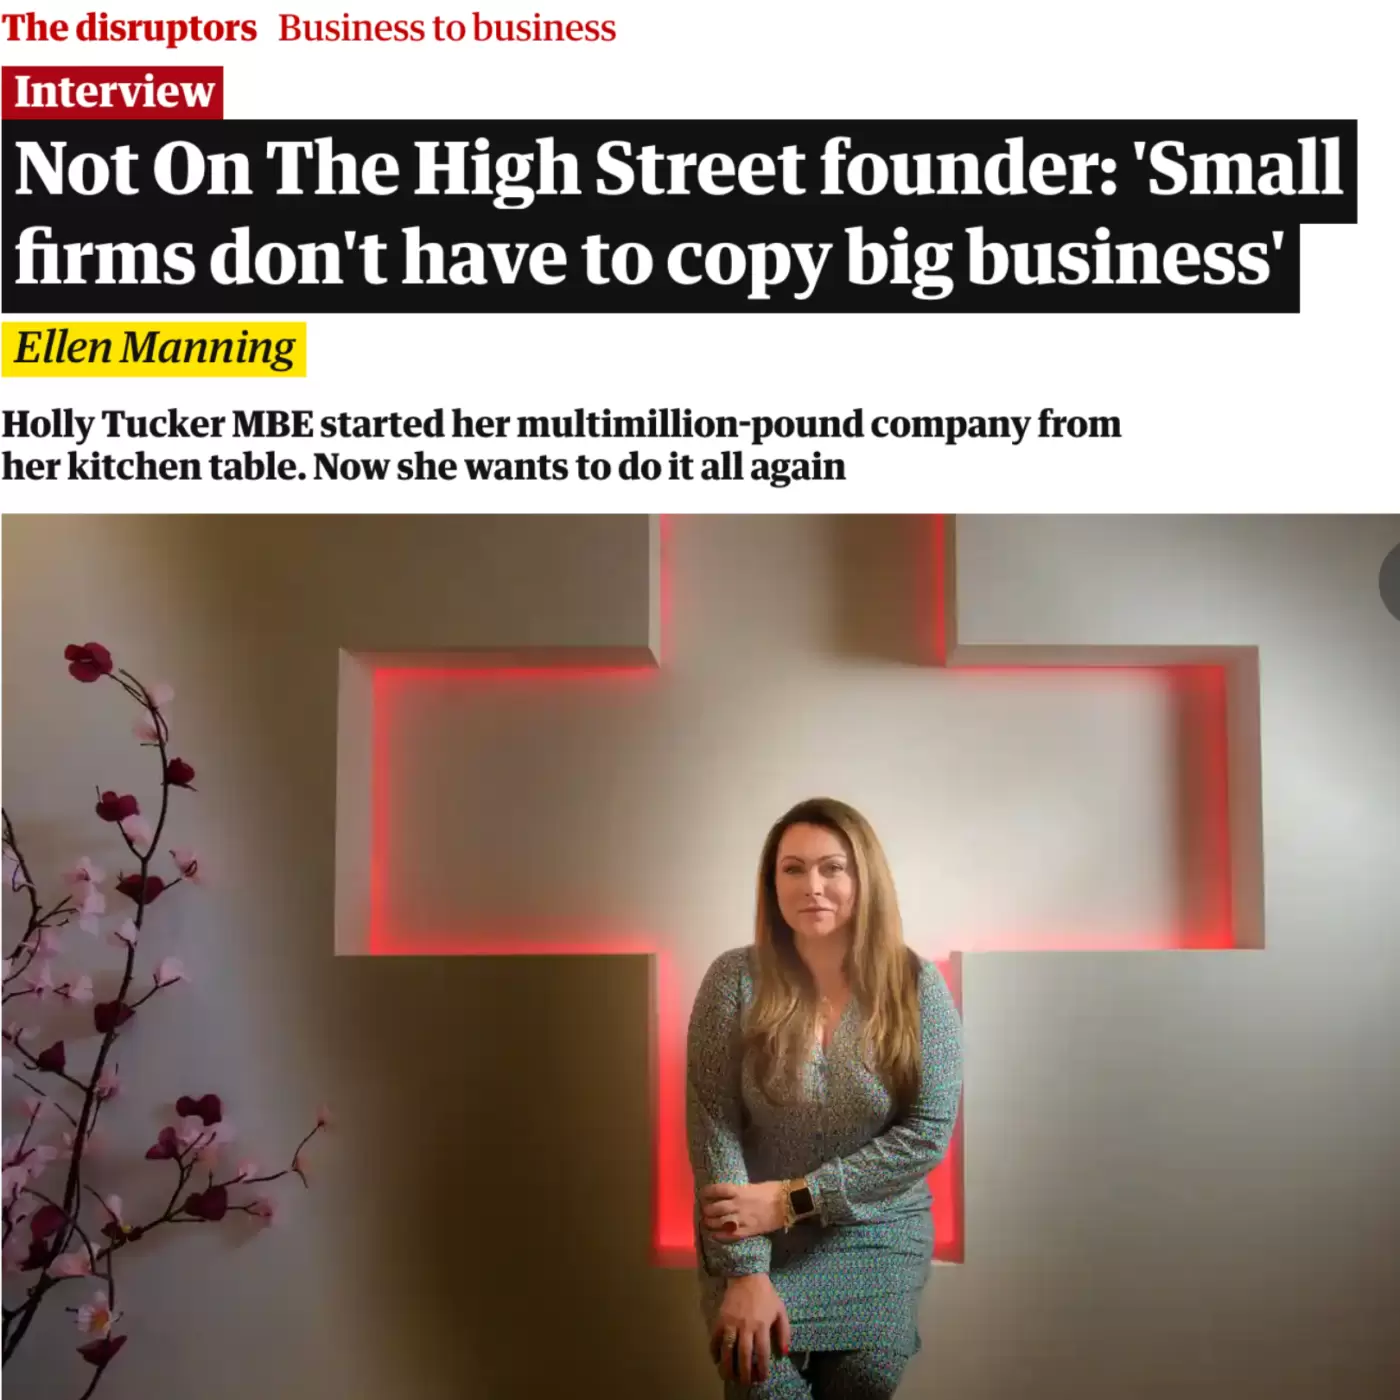 Holly on the Guardian